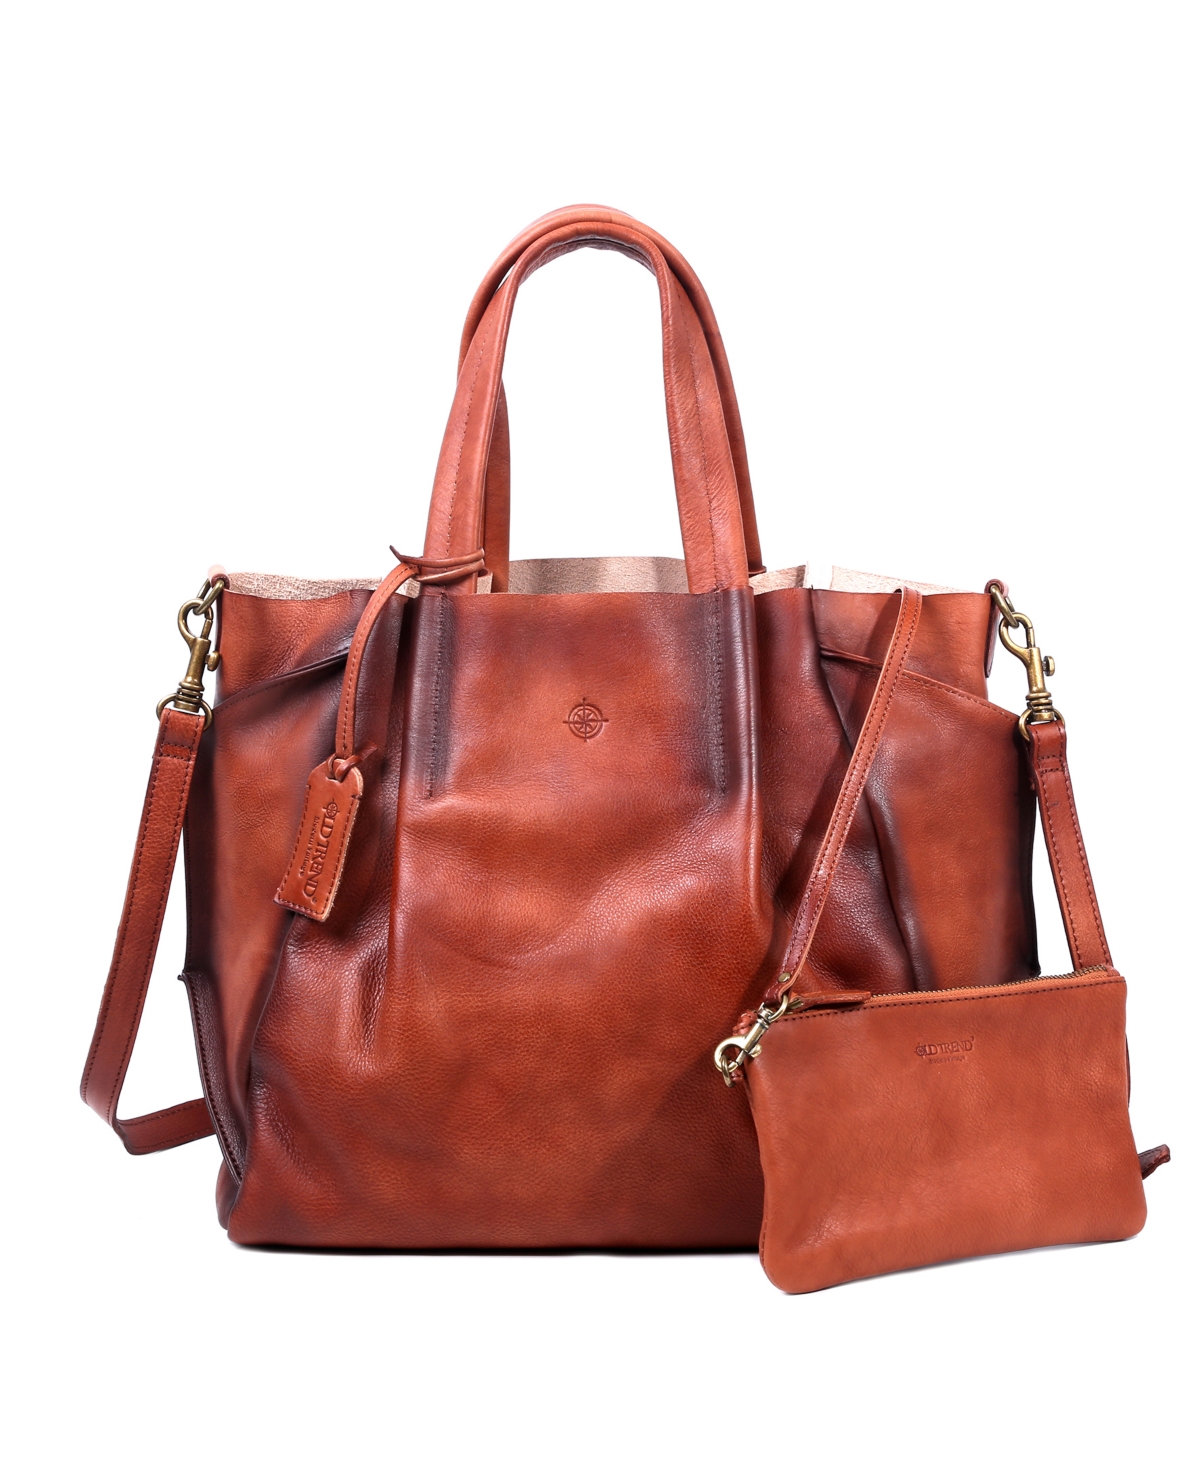 Women's Genuine Leather Sprout Land Tote Bag - Coffee